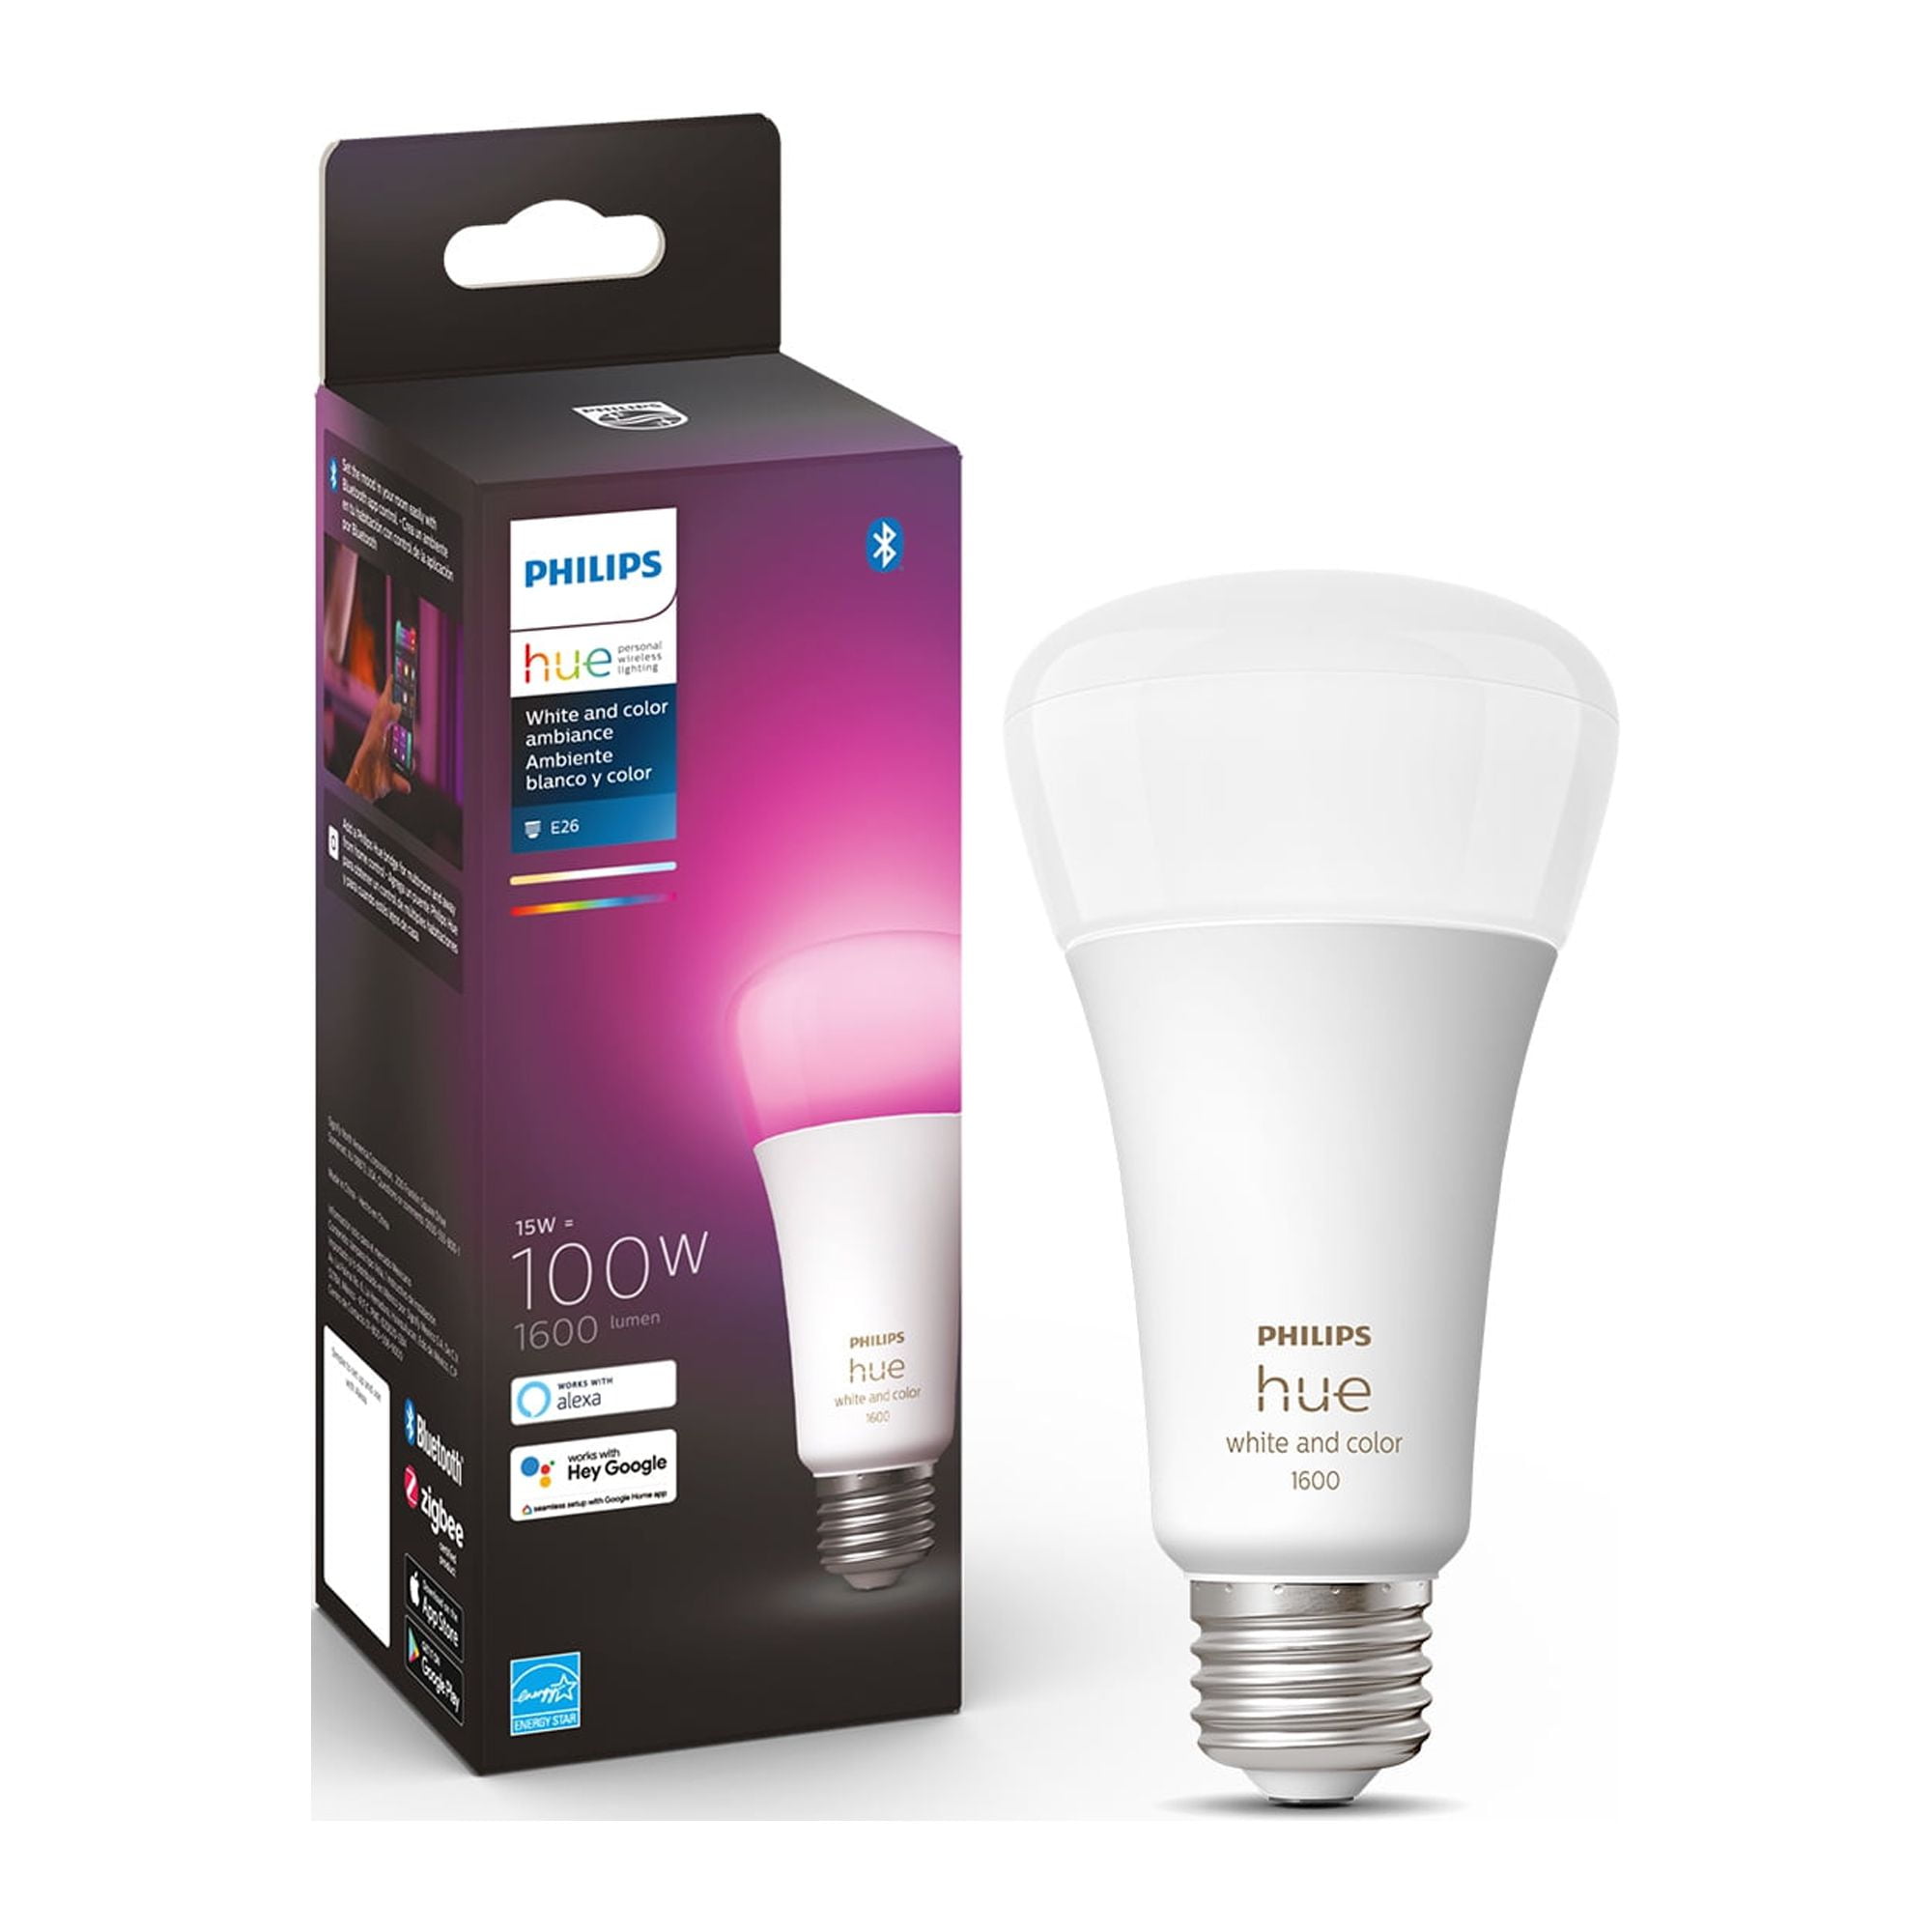 Philips Hue A21 White Ambiance Bulb (1600 lumens) Smart LED light bulb with  dimmable shades of white light and Bluetooth® at Crutchfield